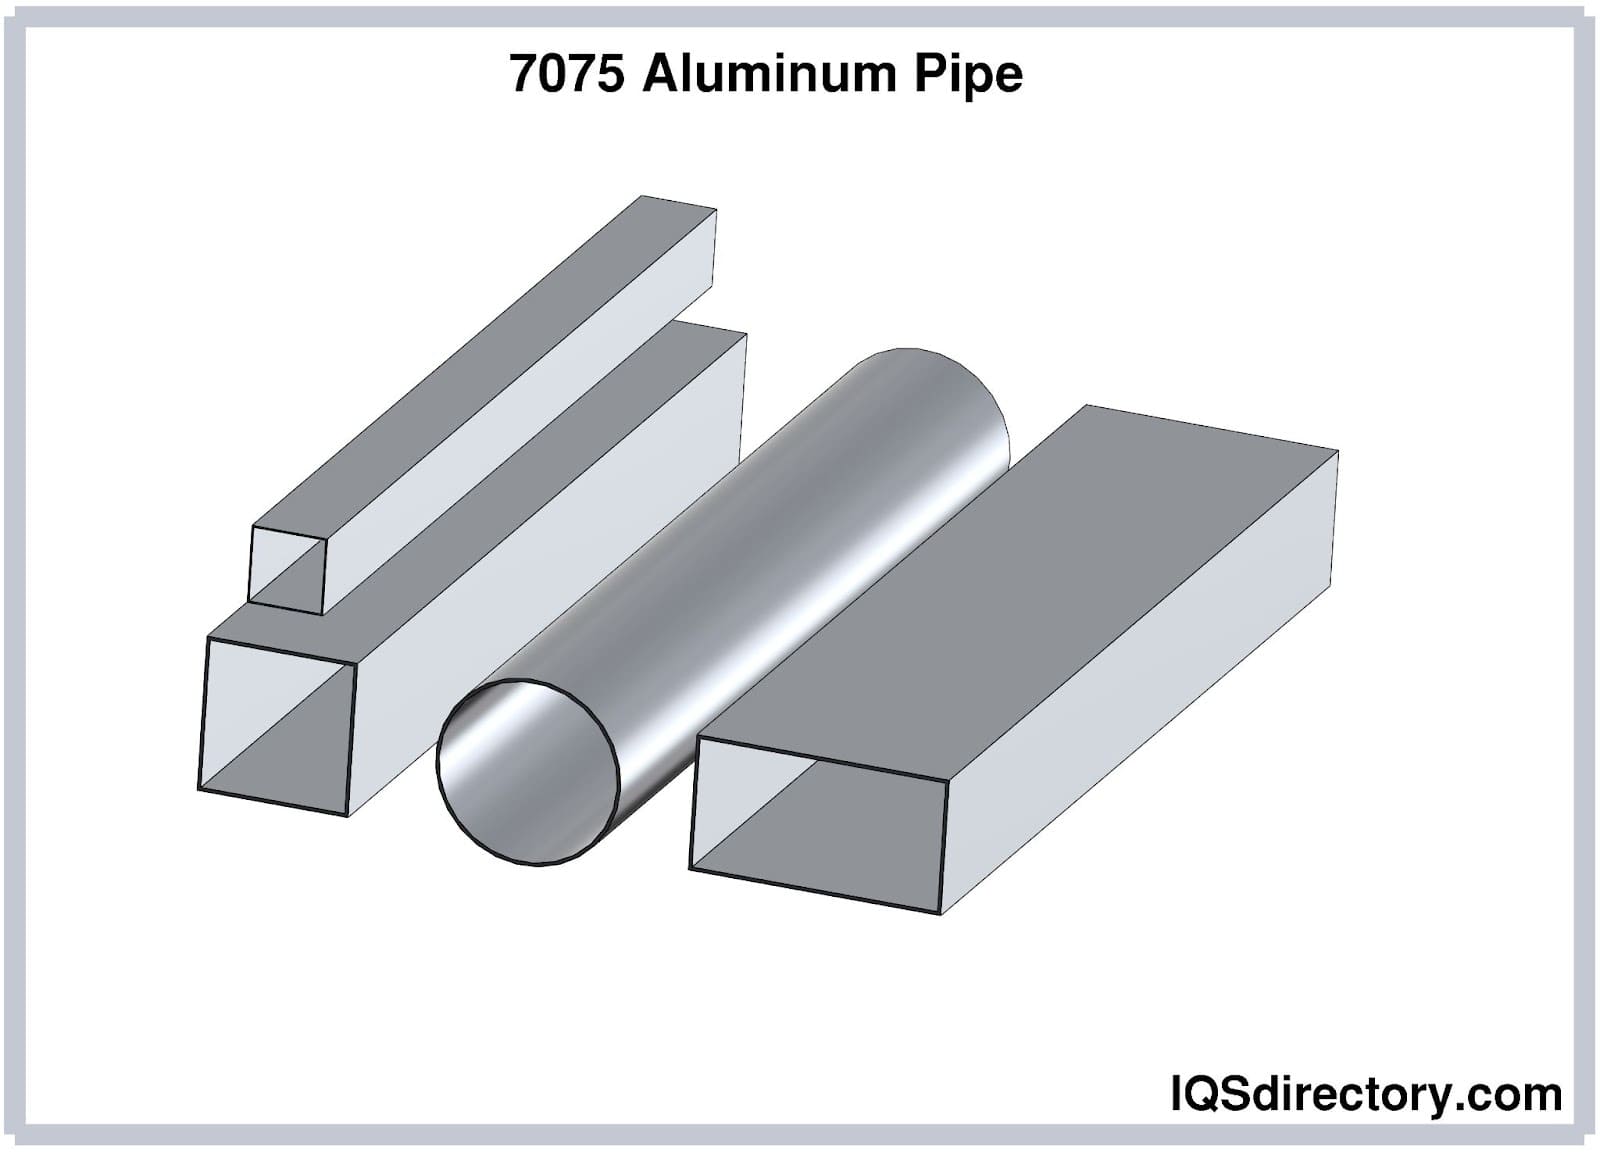 Aluminum Tubing & Piping: Types, Applications, Benefits, and